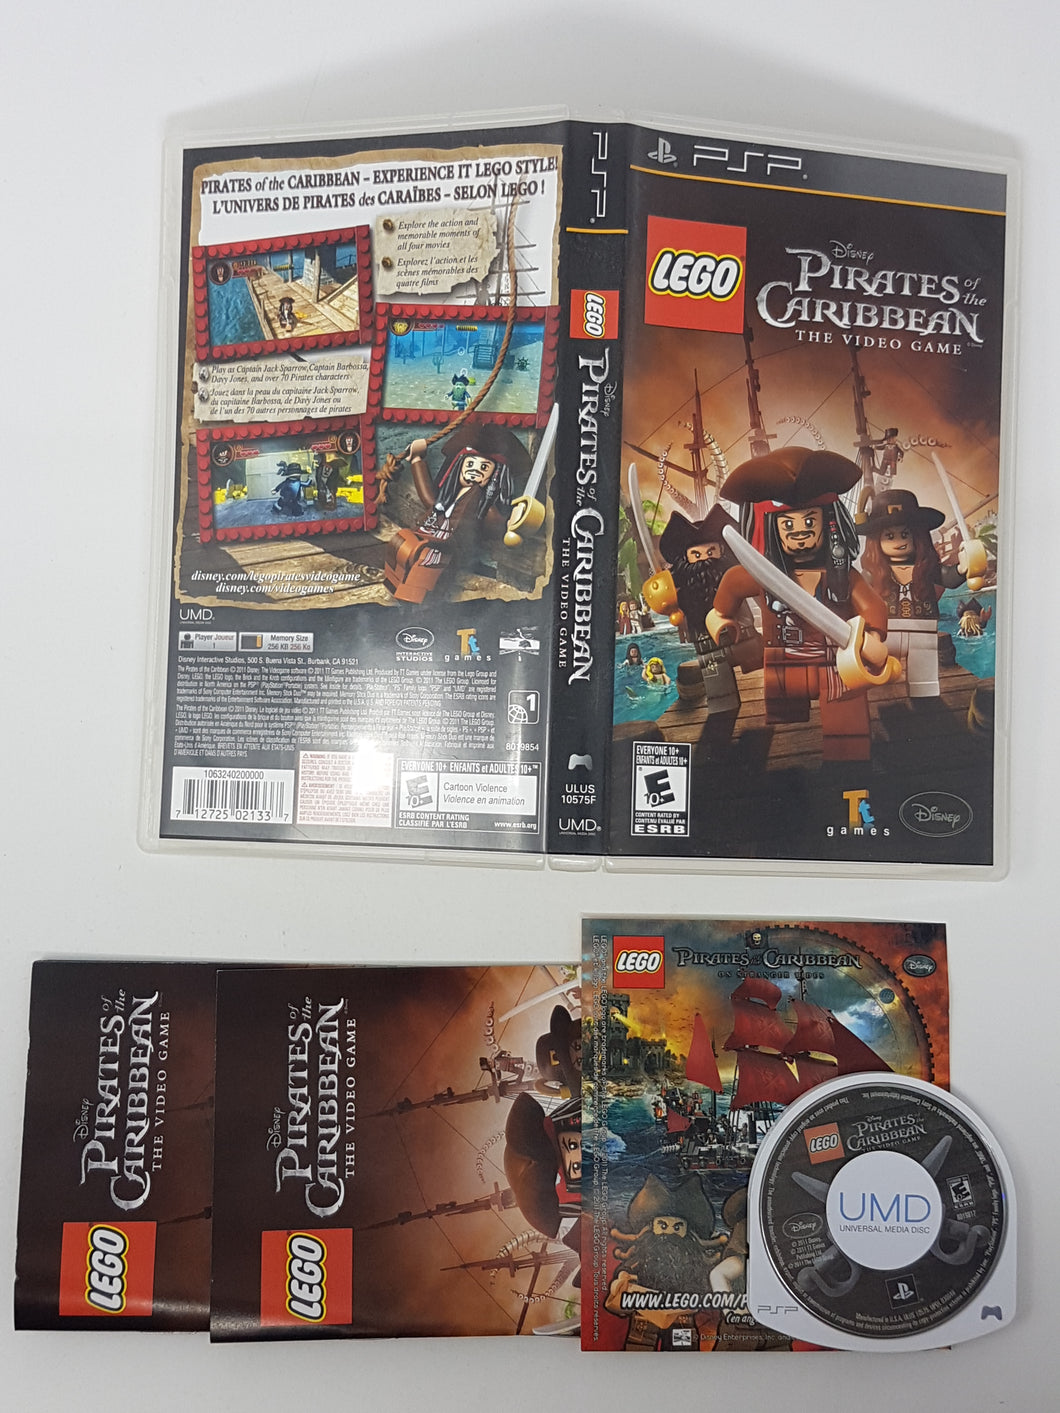 LEGO of the Caribbean - The Game - Sony PSP –